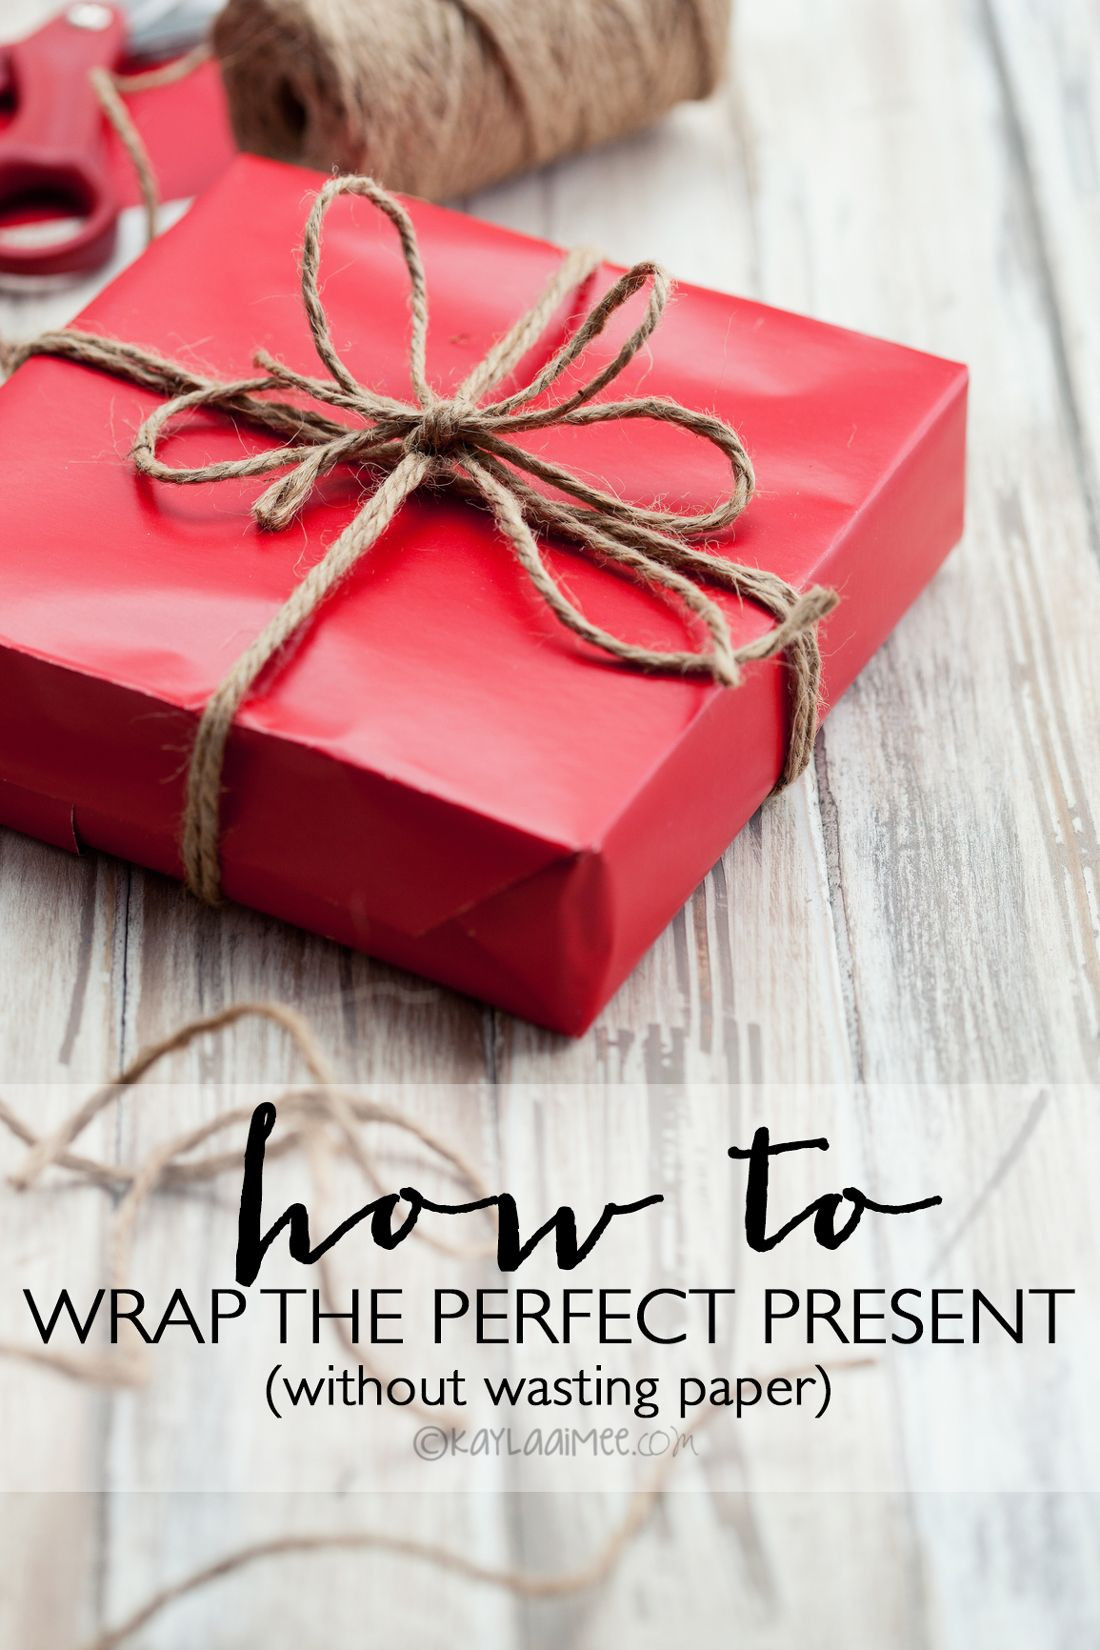 How To Wrap A Baby Gift Without Wrapping Paper
 How To Wrap The Perfect Present Without Wasting Paper